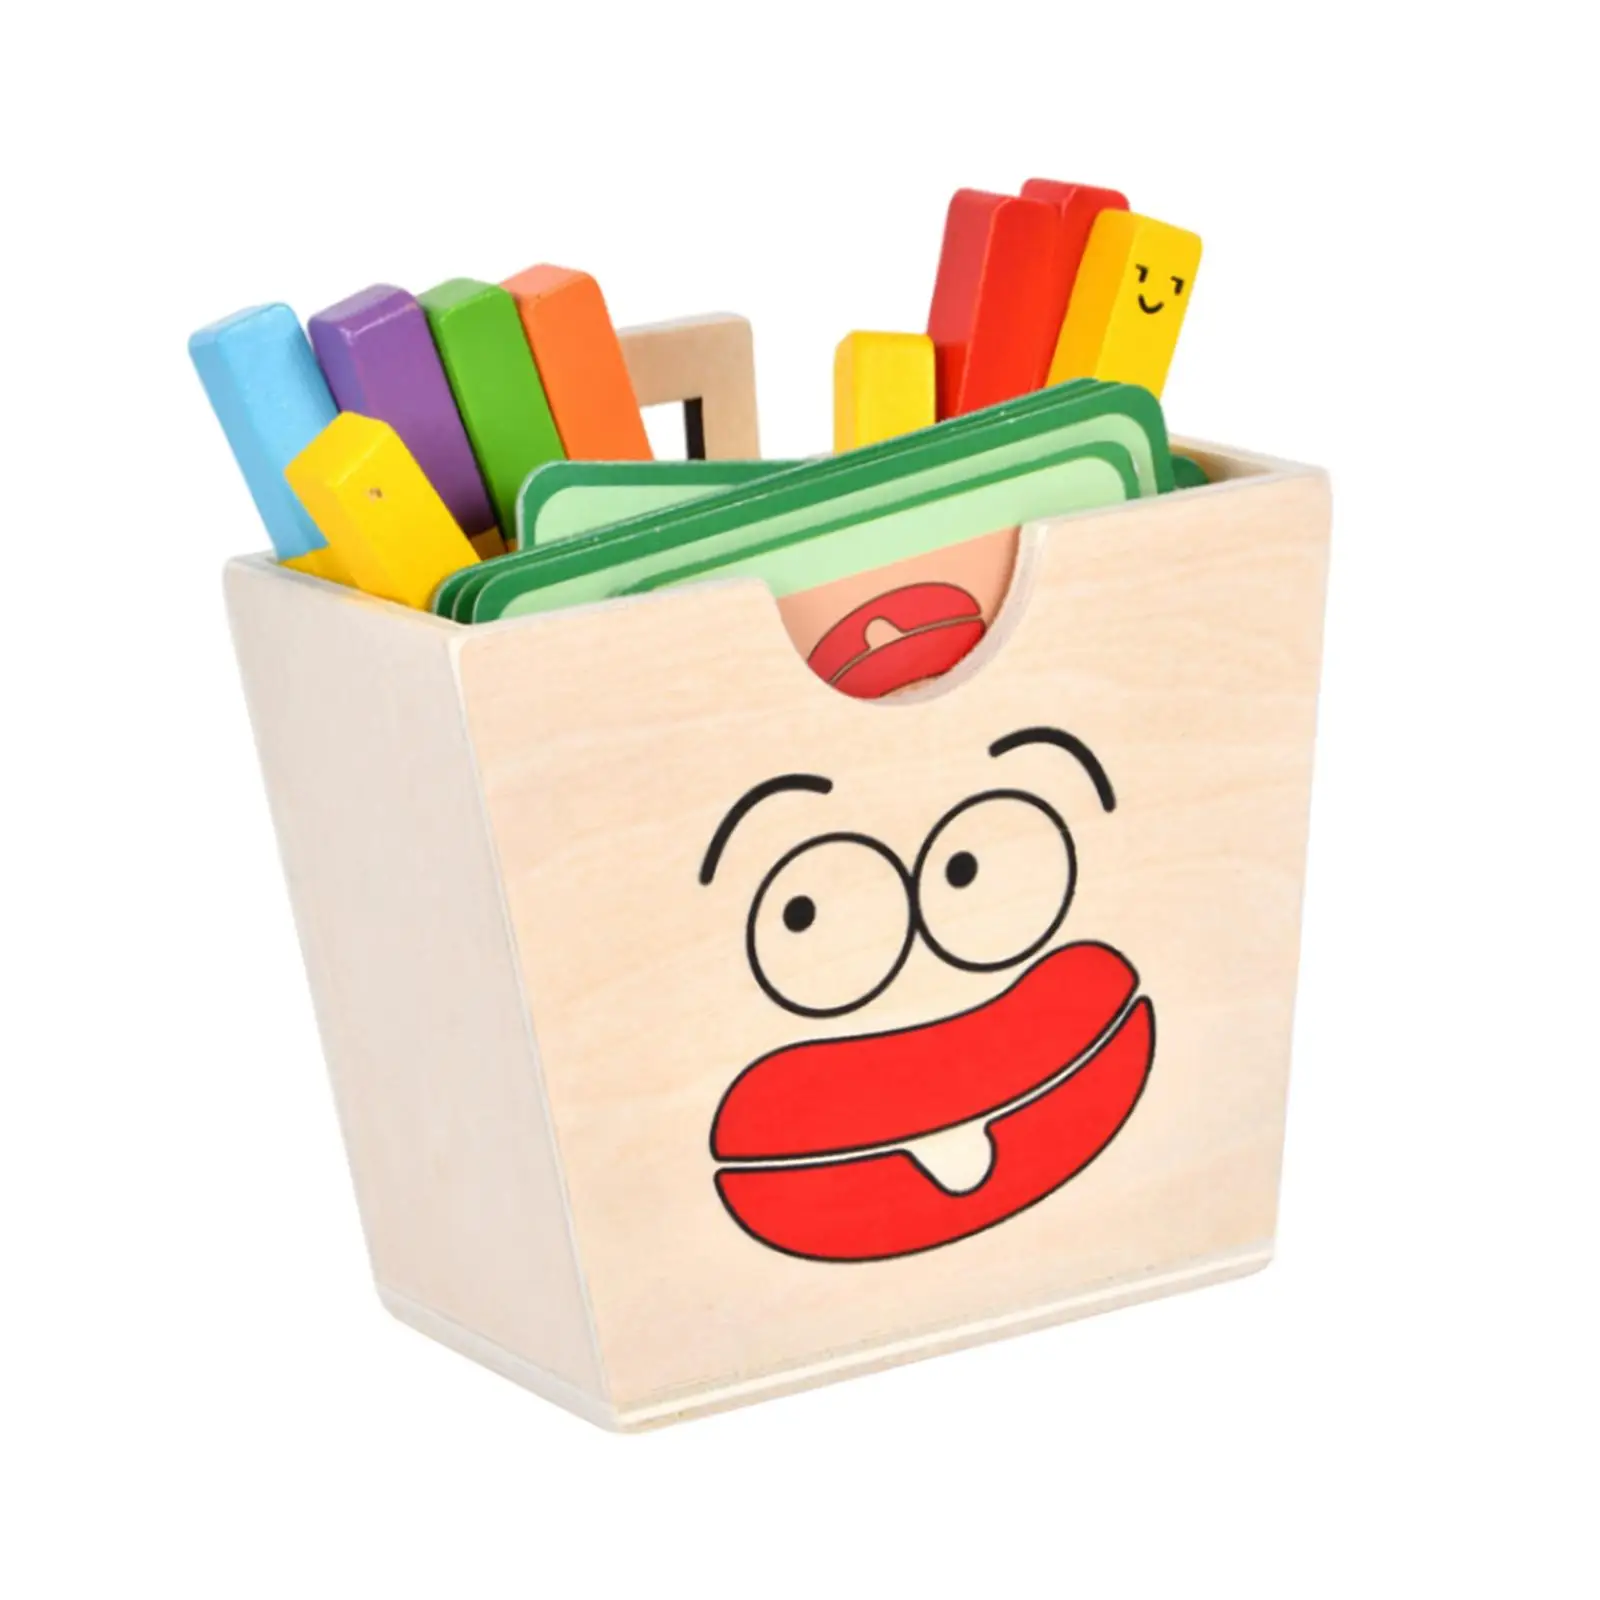 Simulation French Fries Color Matching Game Coordination Educational Color Sorting Matching Box for Activity Learning Preschool